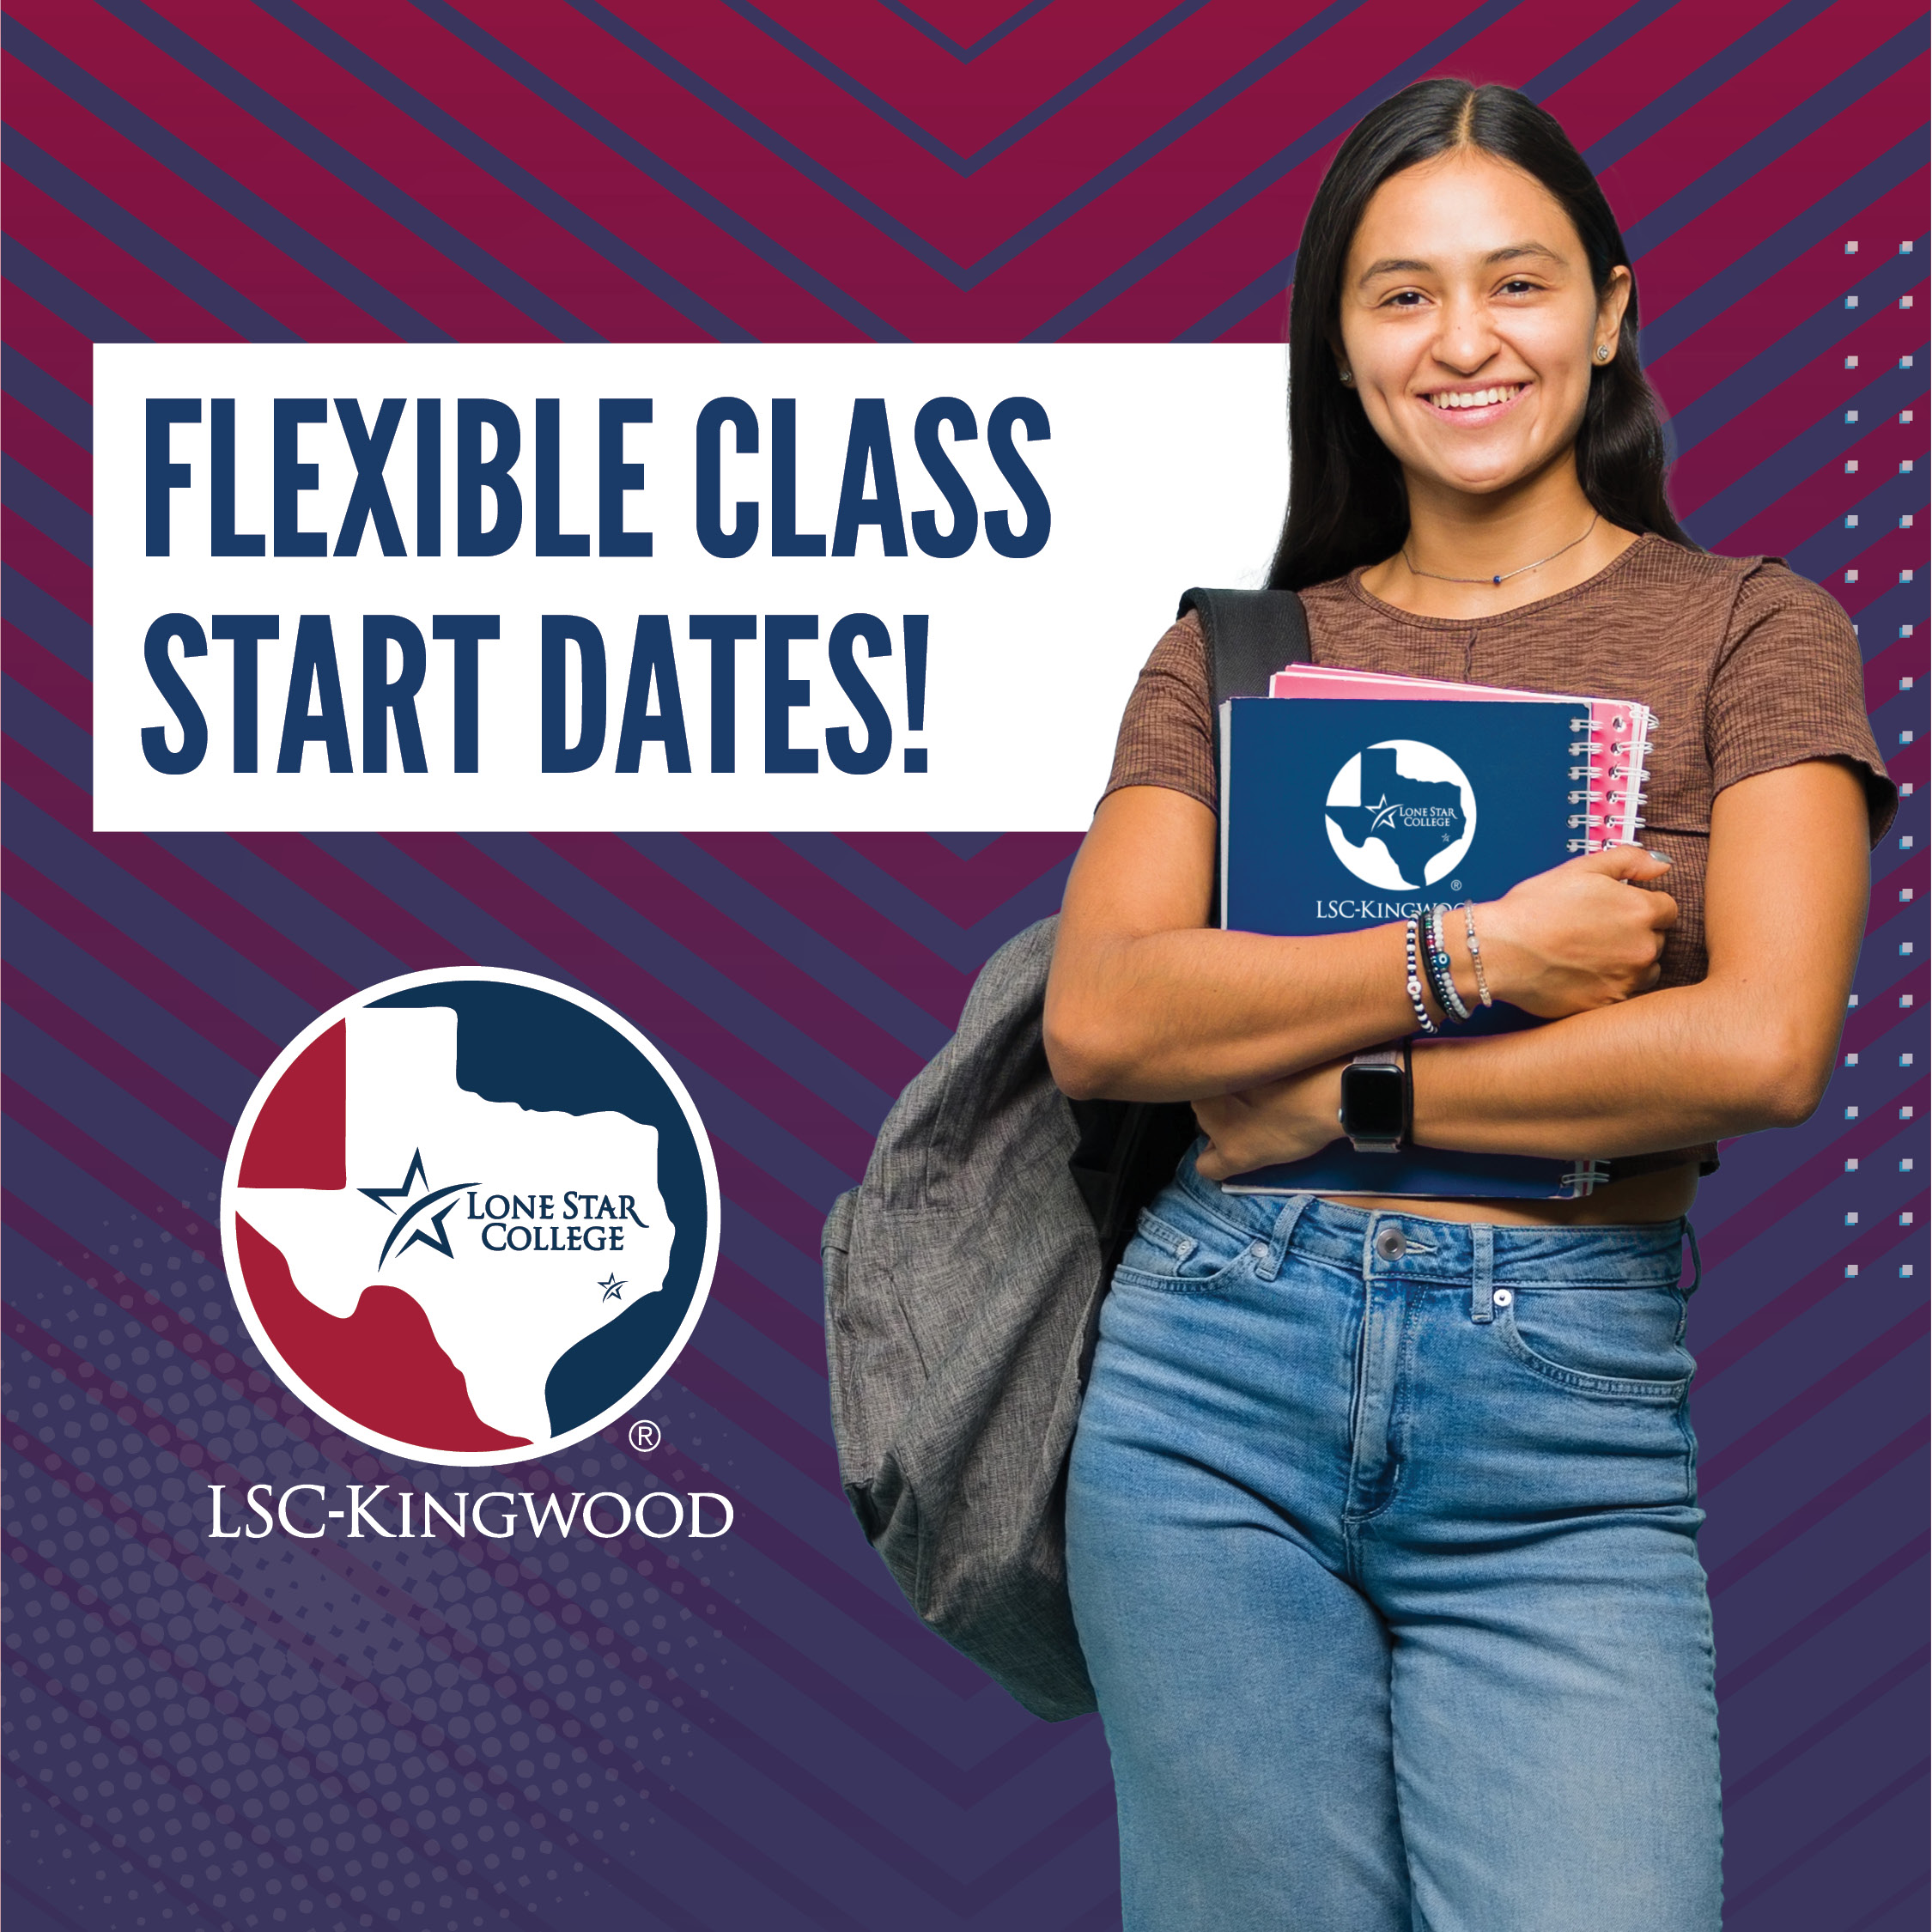 Focus On Your Future  8, 12, and 14-Week Flexible Class Options Available Now at LSC-Kingwood! LoneStar.edu/Register